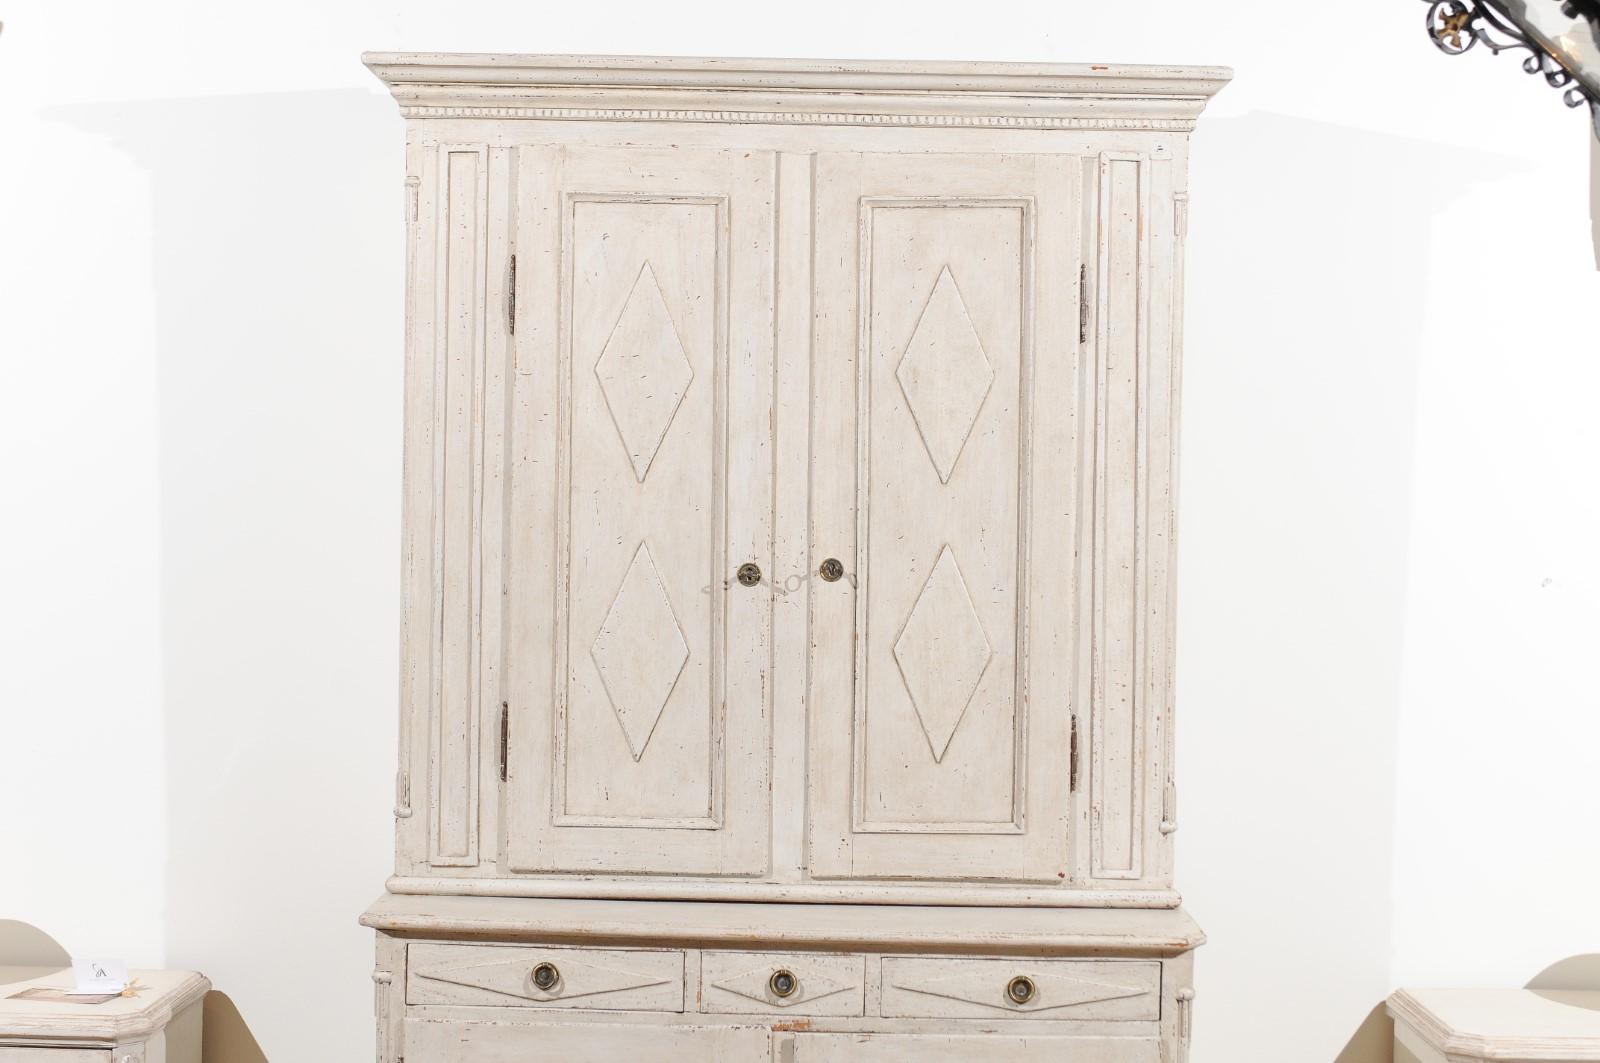 Swedish 1790s Gustavian Period Painted Wood Two-Part Cabinet with Diamond Motifs 1